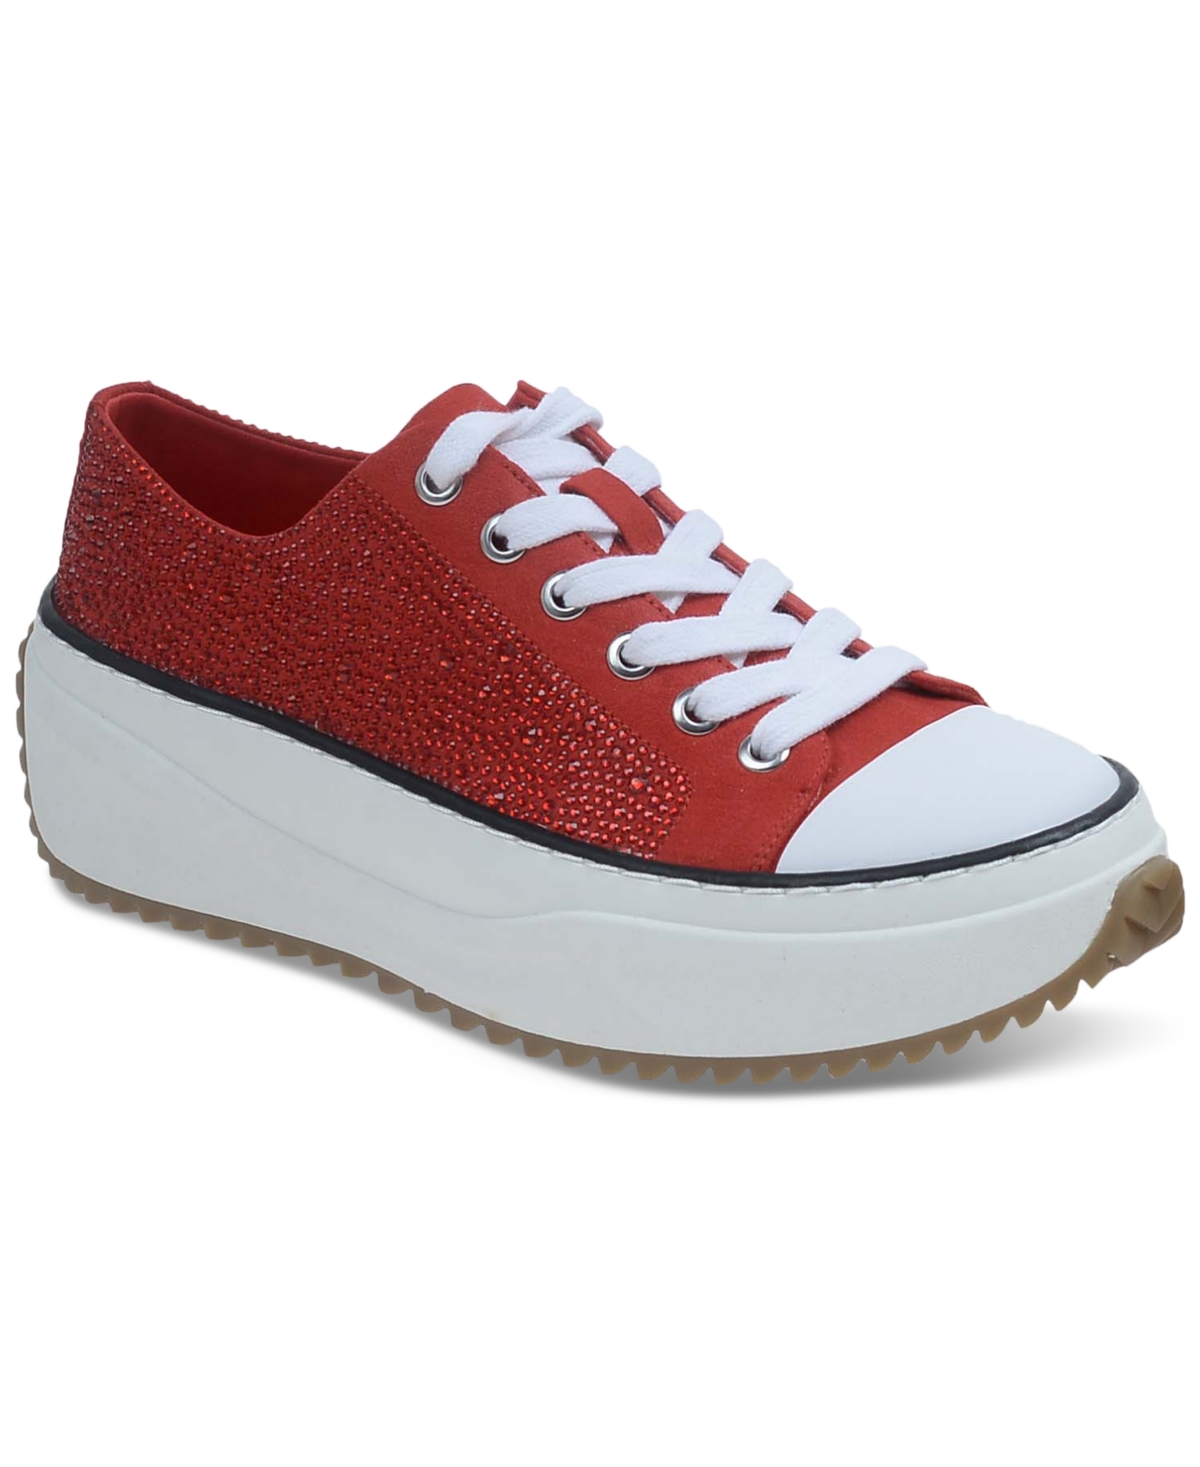 Highfive Bling Lace-Up Low-Top Sneakers, Created for Macy's - Red Bling